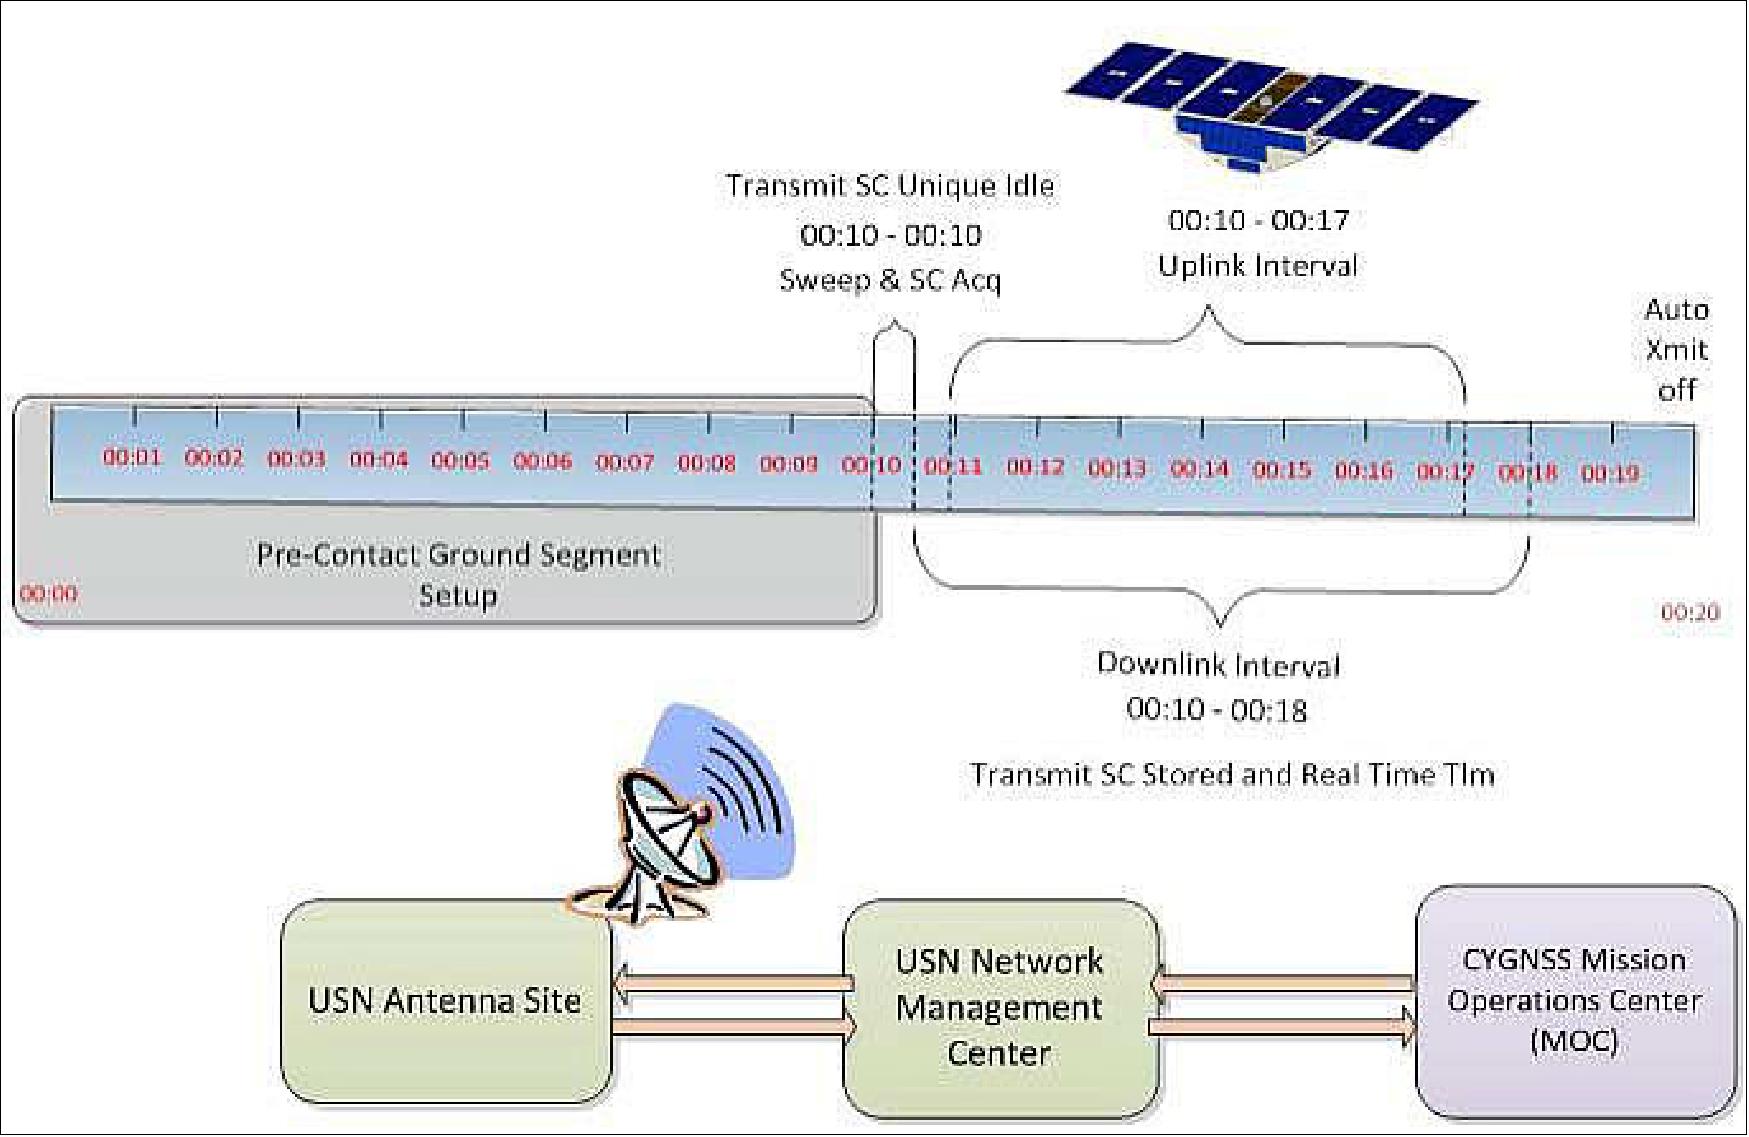 Figure 53: Typical CYGNSS communication pass timeline (image credit: CYGNSS project)